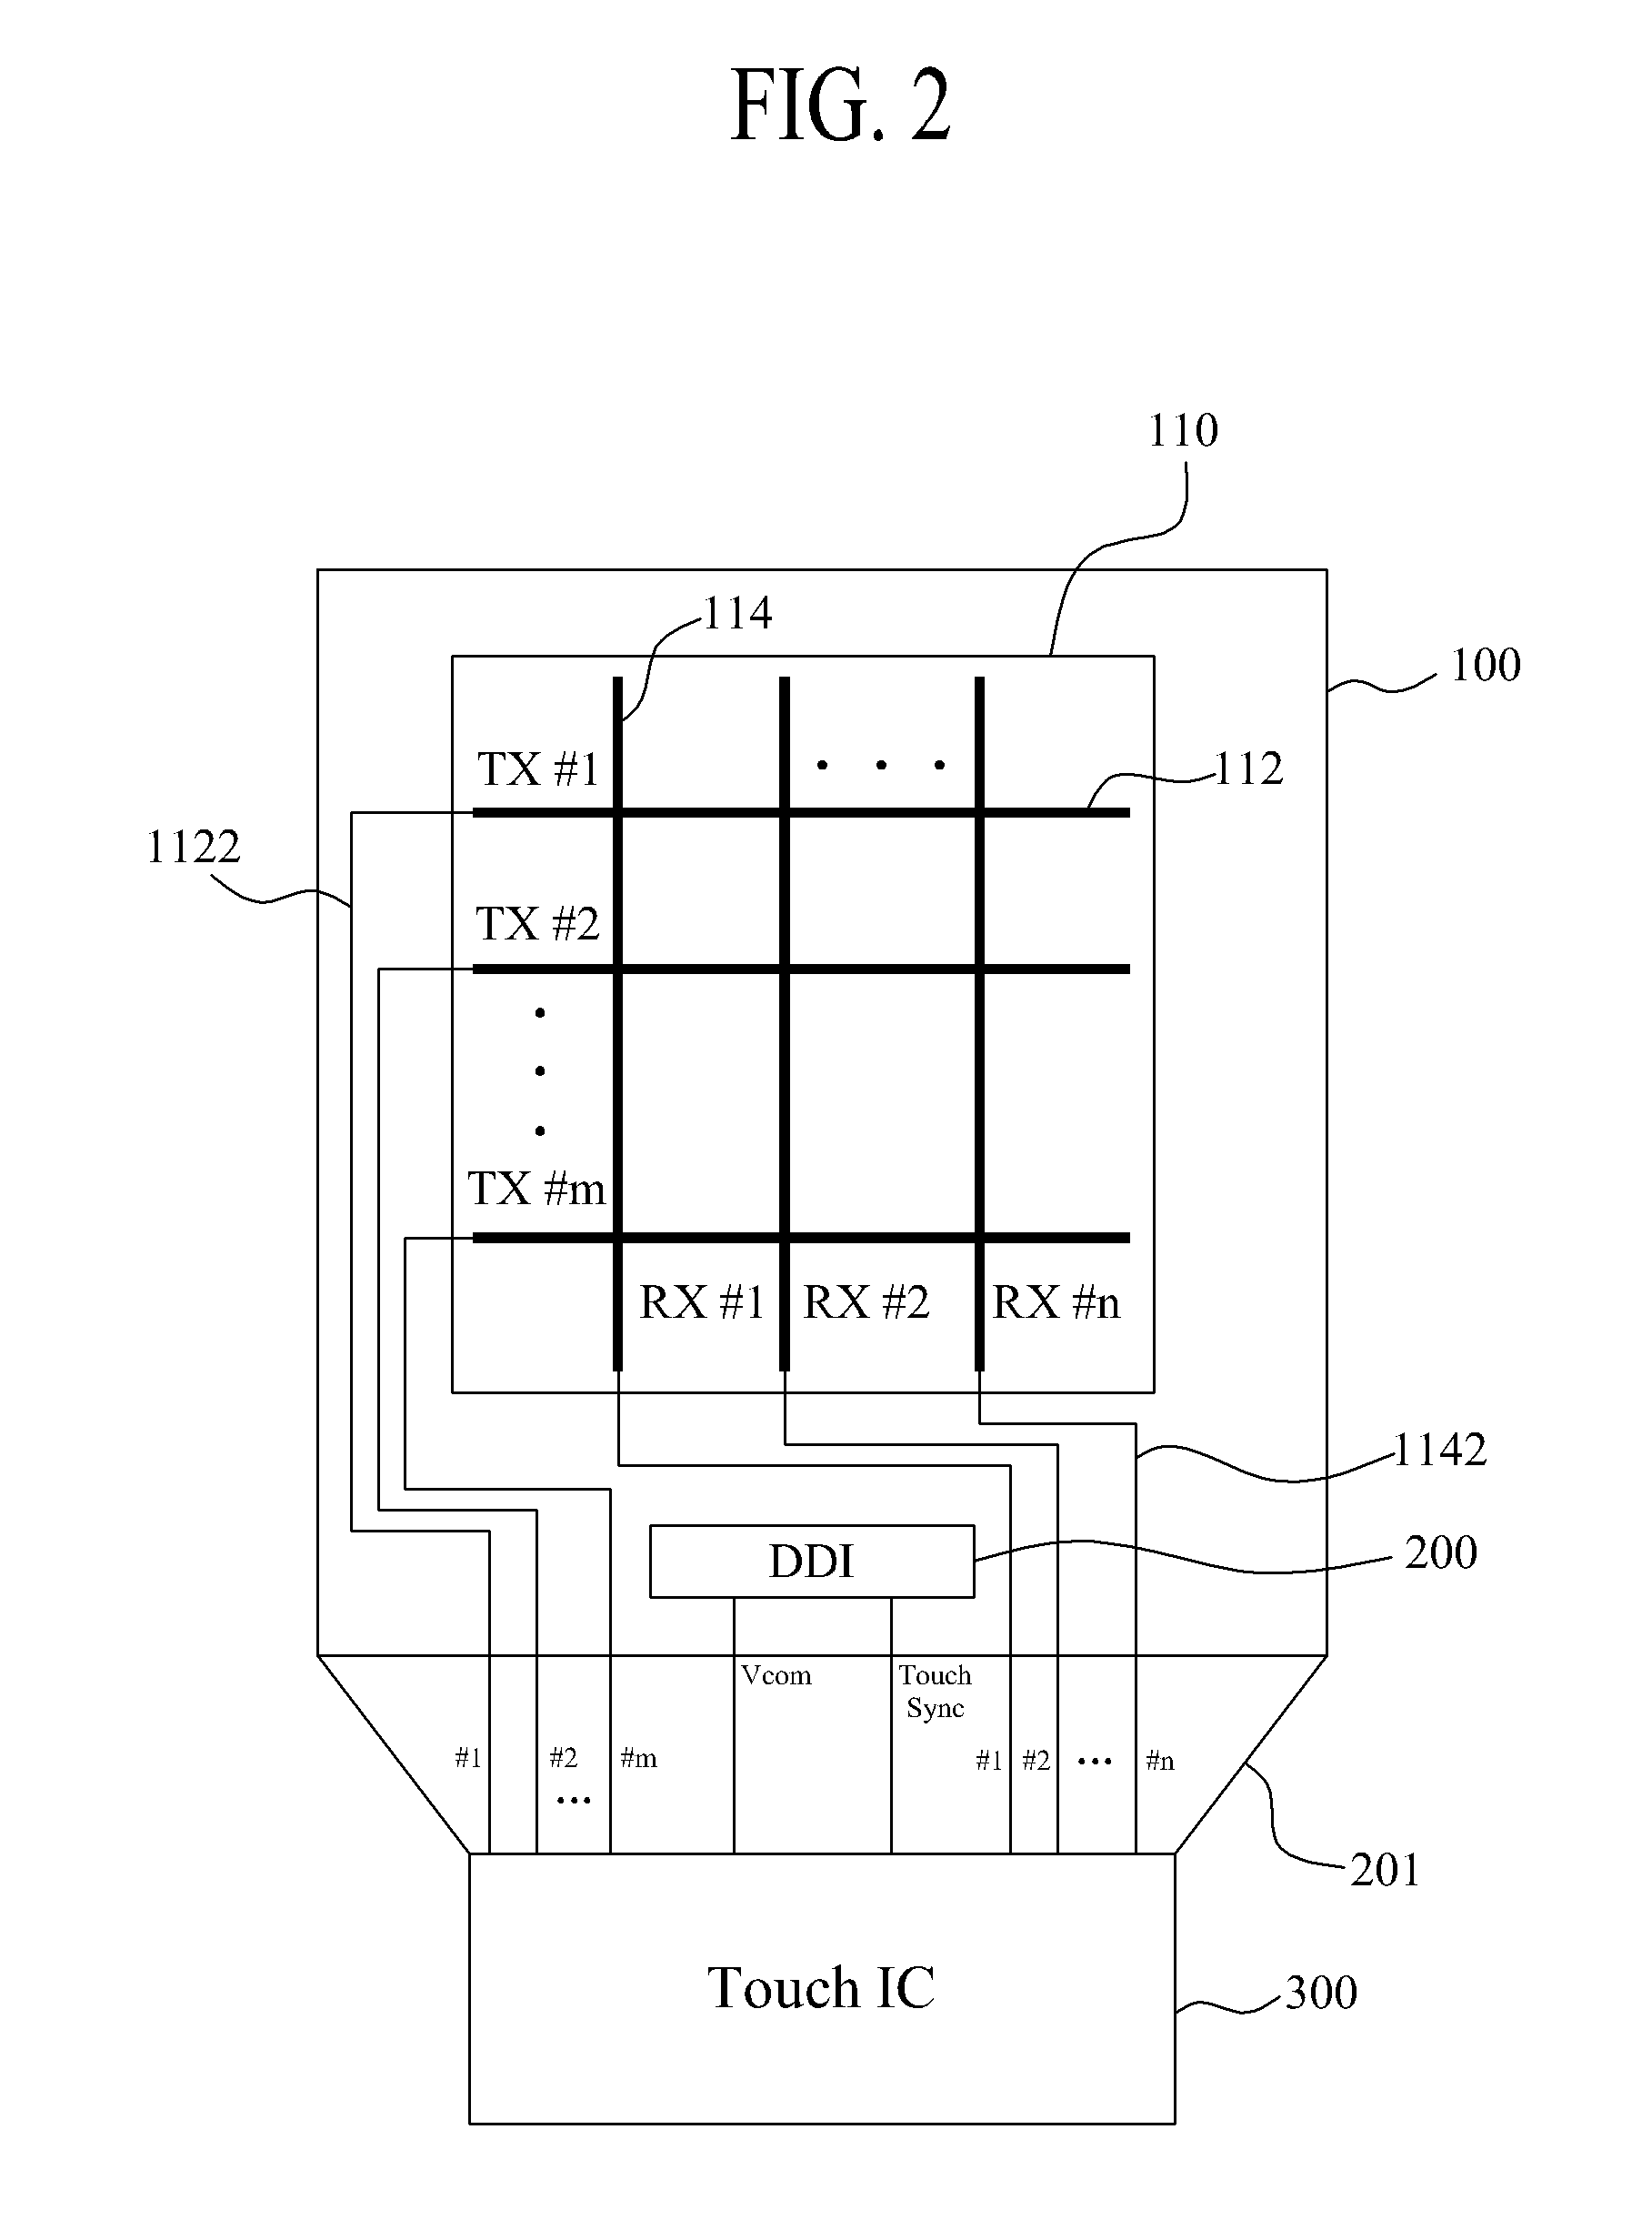 Display Device with Integrated Touch Screen